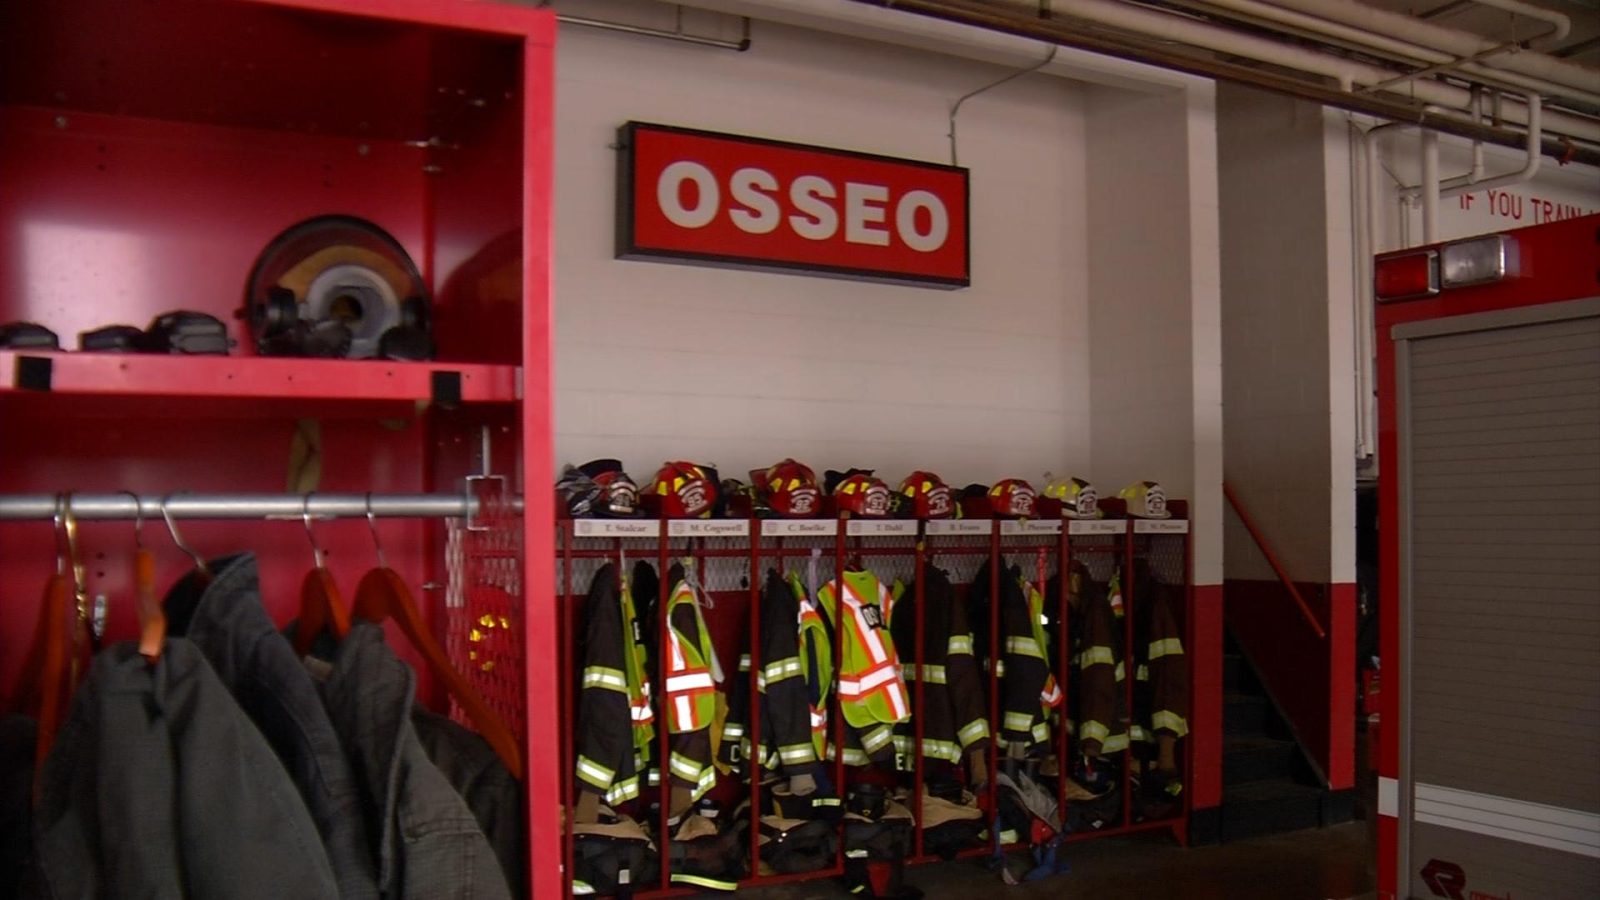 osseo fire mike phenow